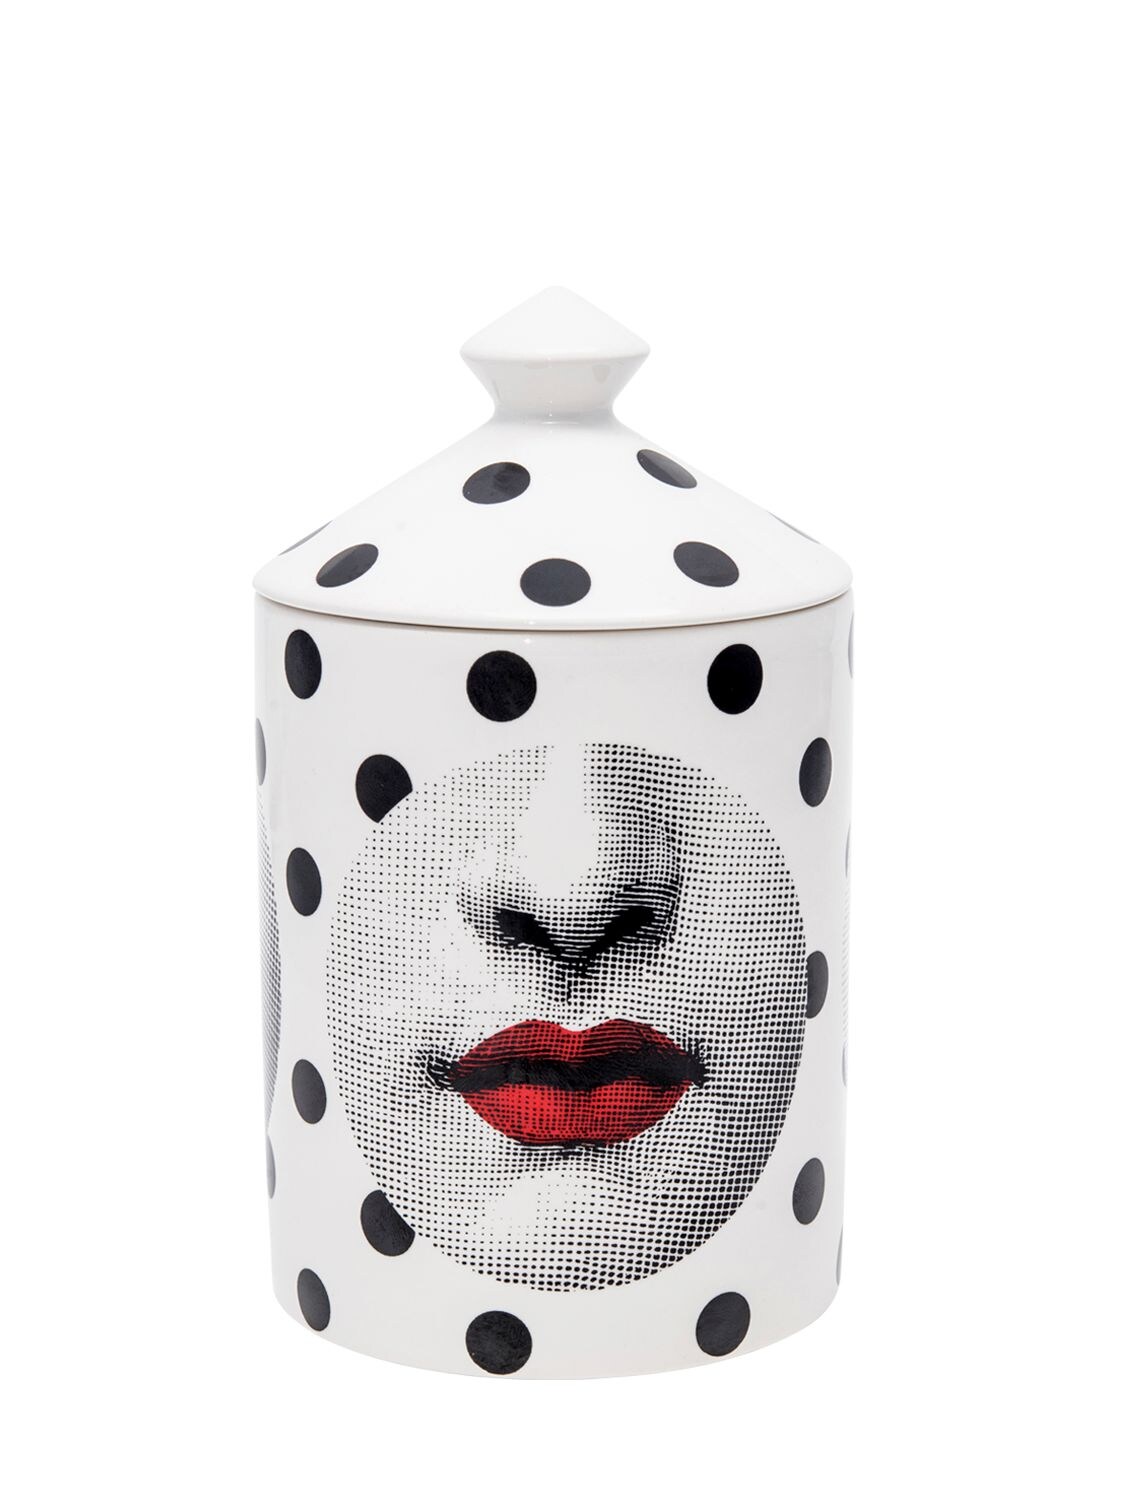 FORNASETTI COMME DES FORNÀ OTTO SCENTED CANDLE,72I9N0001-V0HJVEU1